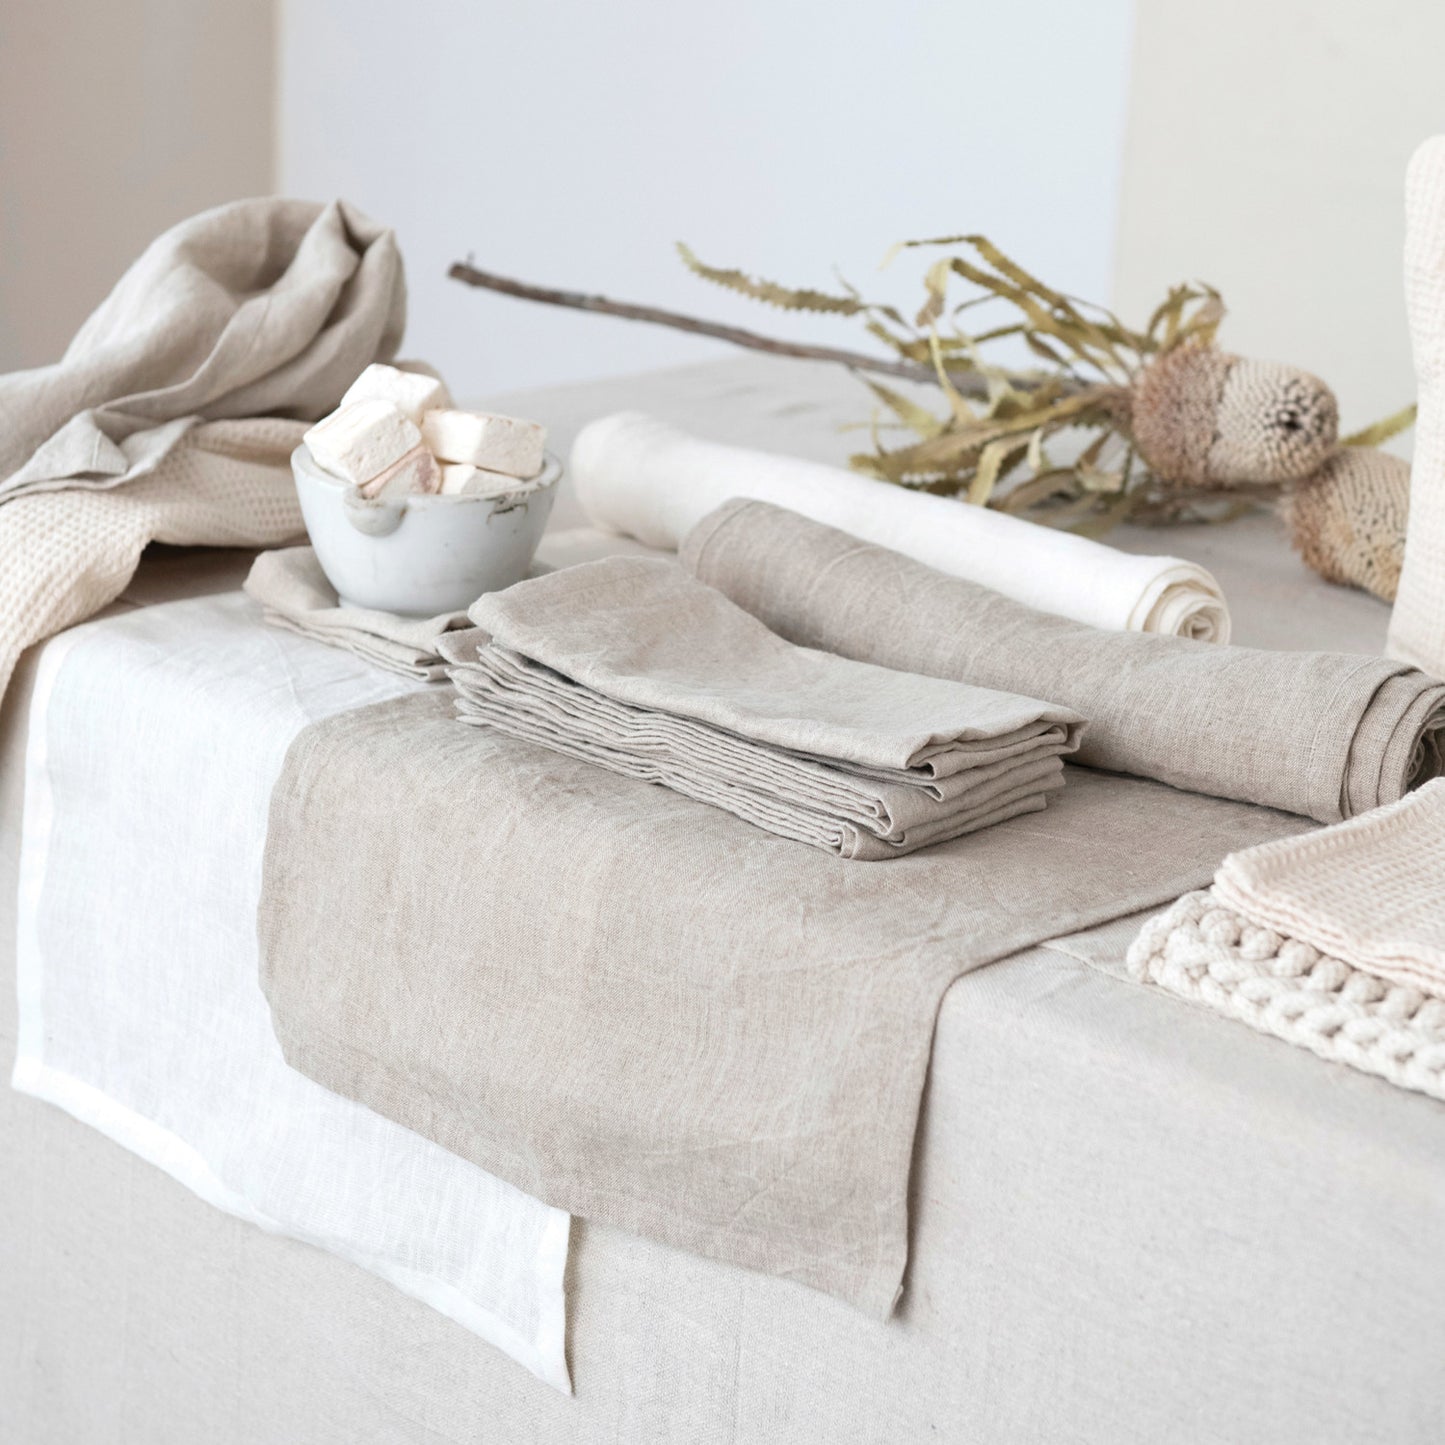 Stonewashed Linen Table Runner